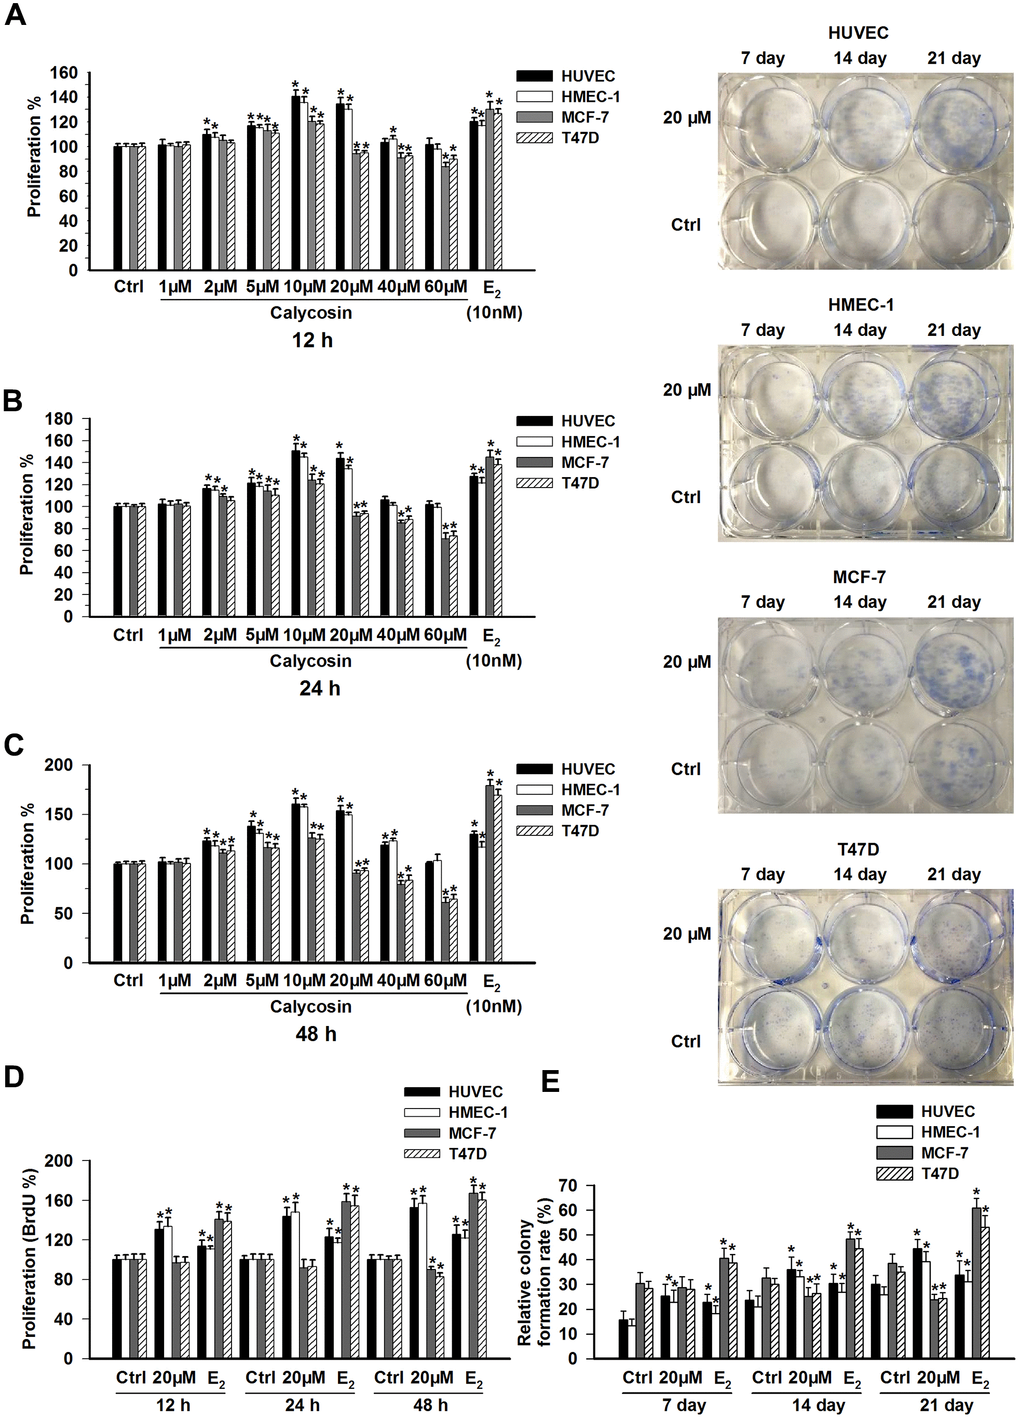 Effects of calycosin on the proliferation of ECs and BCCs. (A–C) HUVECs, HMEC-1 cells, MCF-7 cells and T47D cells were treated with calycosin (1-60 μM) or E2 (10 nM) for 12, 24, or 48 h. Cell proliferation was determined using a CCK-8 assay. (D) HUVECs, HMEC-1 cells, MCF-7 cells and T47D cells were treated with calycosin (20 μM) or E2 (10 nM) for 12, 24, or 48 h. Cell proliferation was determined using the BrdU assay. (E) For the colony formation assays, after treatment with calycosin (20 μM) or E2 (10 nM) for 7, 14, and 21 days, the numbers of cell colonies were counted. The results are from three independent experiments performed in triplicate. *p 